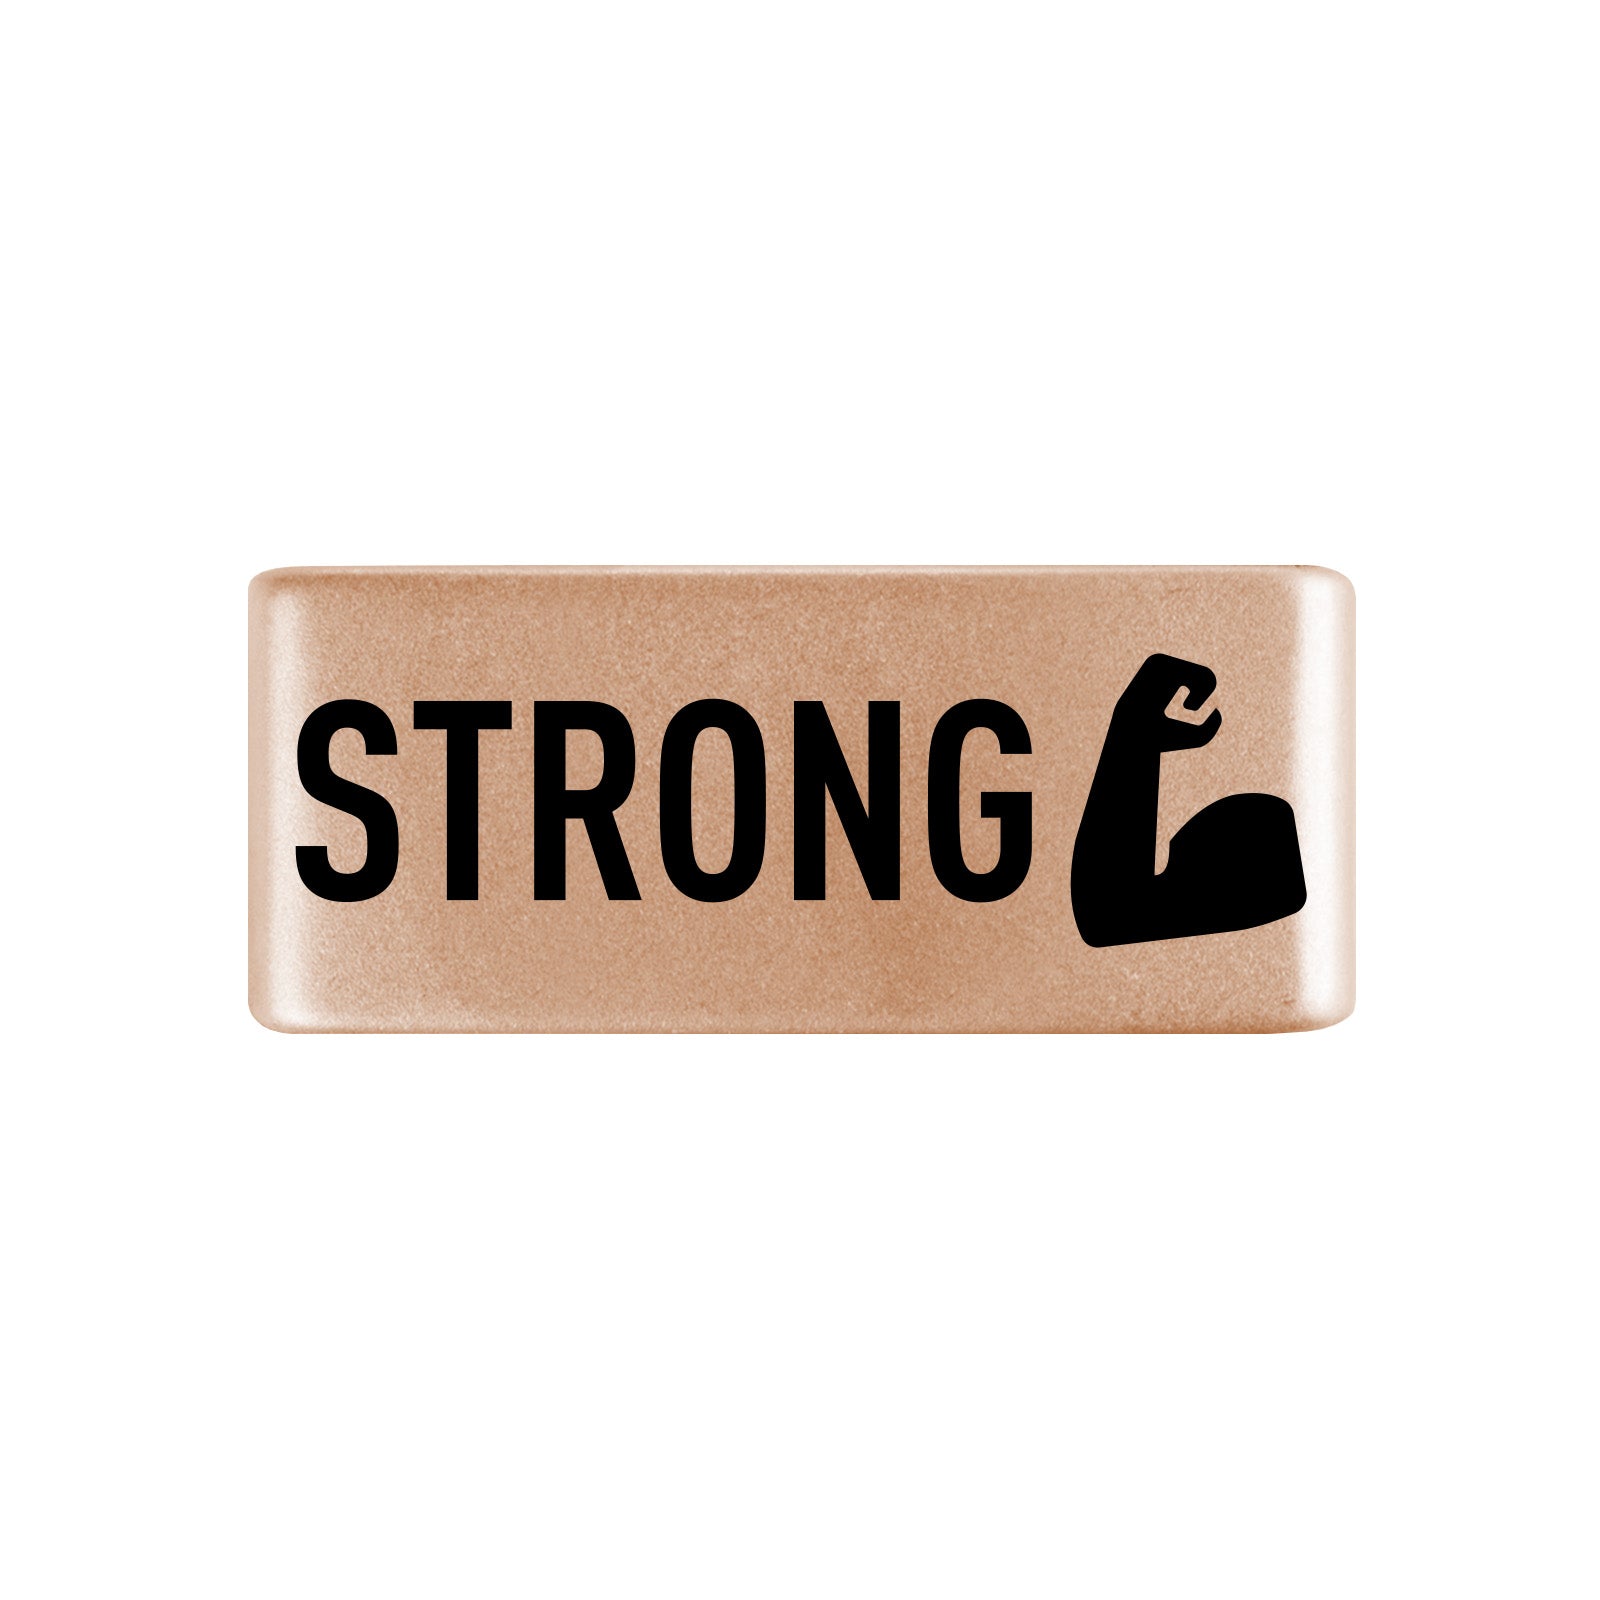 Strong Badge Badge 13mm - ROAD iD